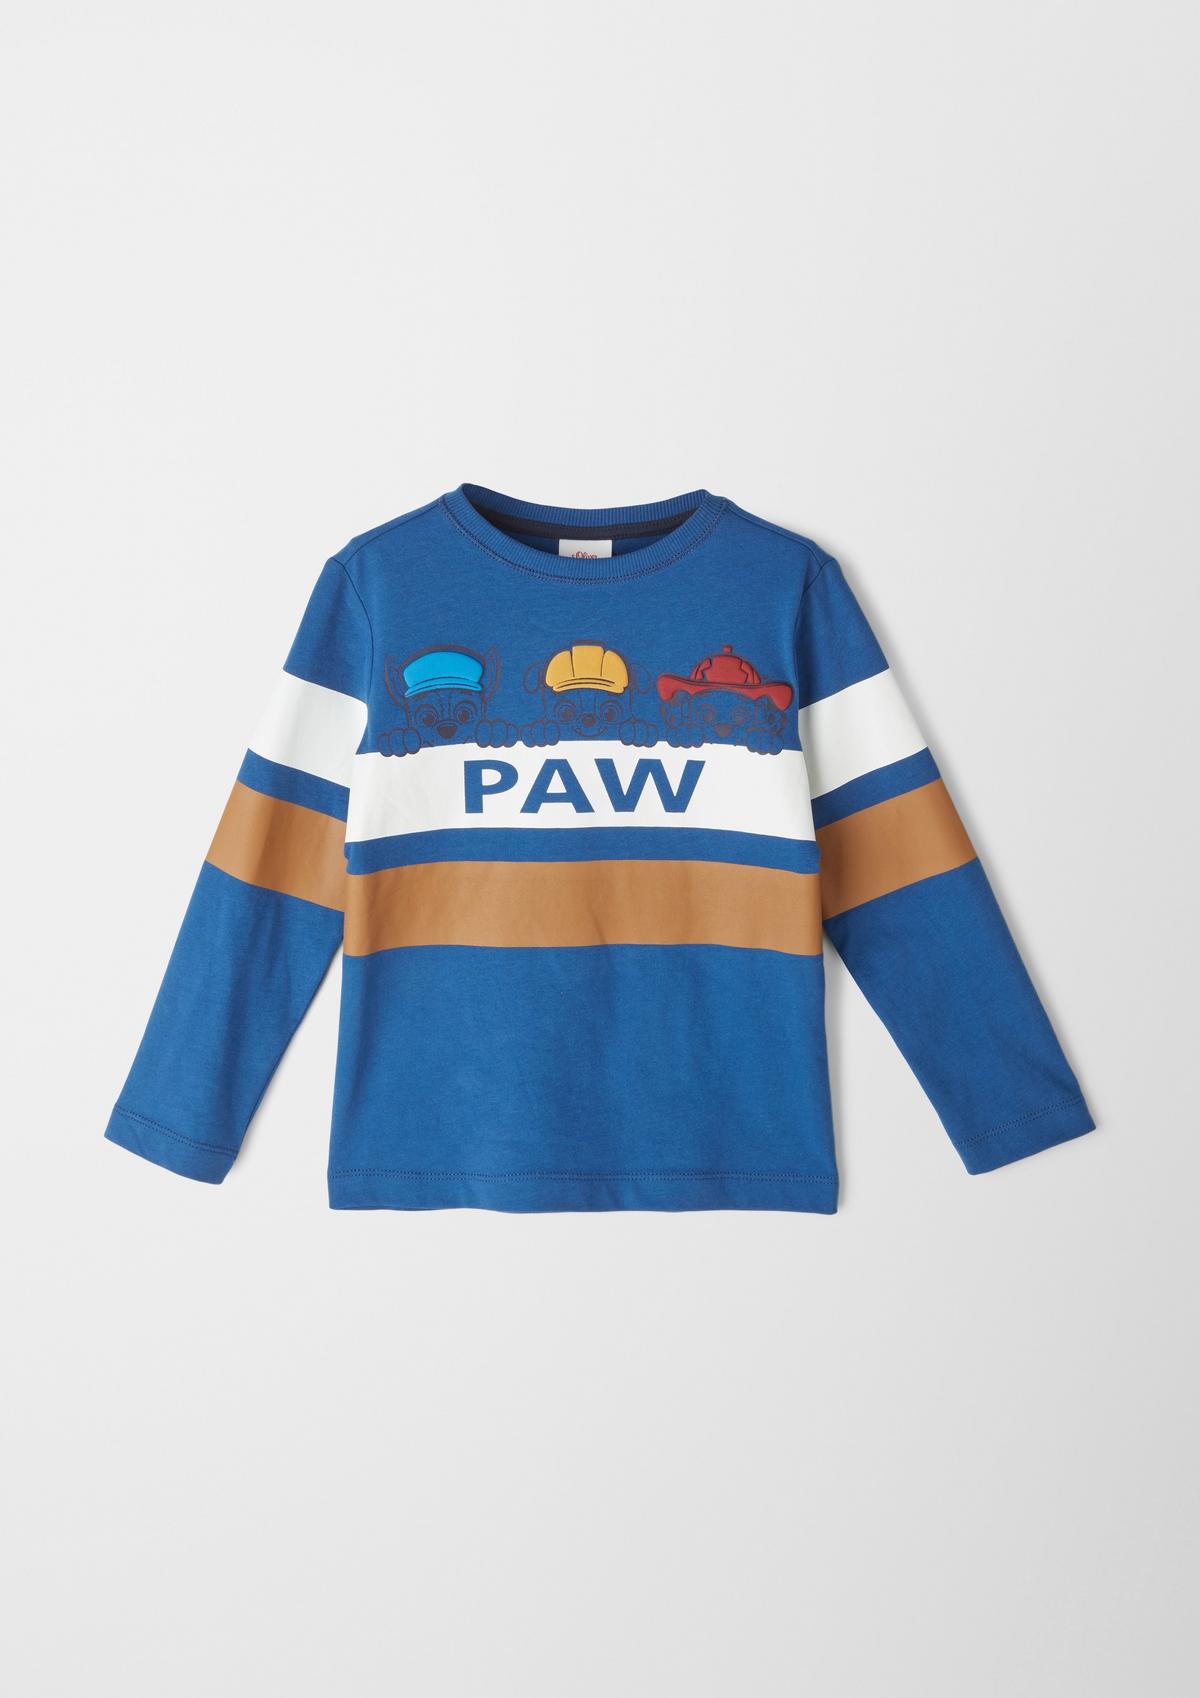 s.Oliver Top with a Paw Patrol motif